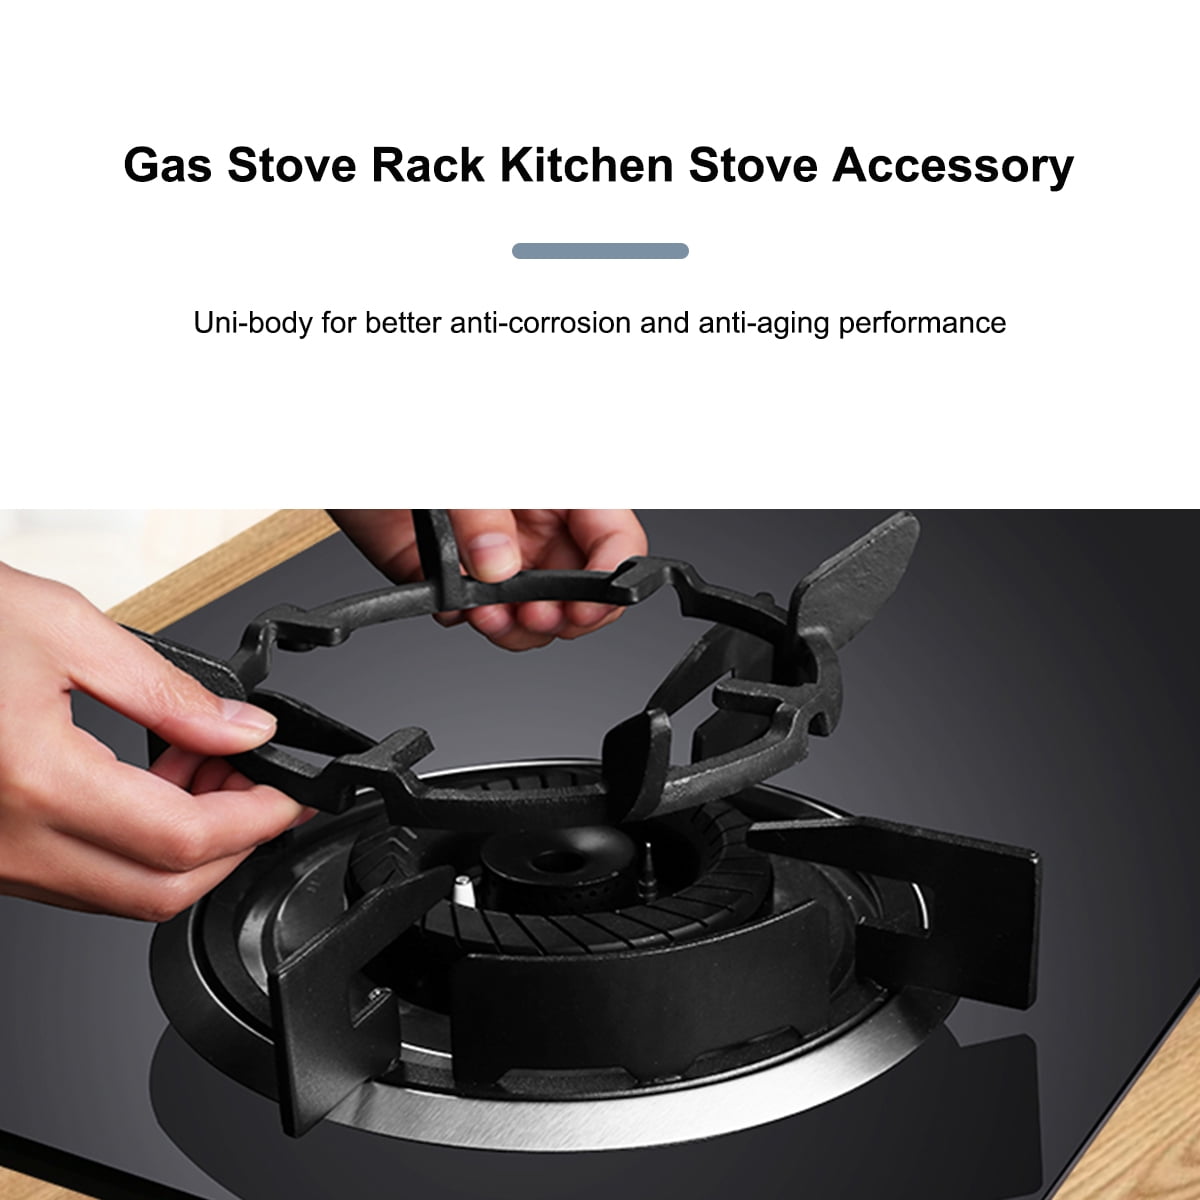 Practical Gas 1pc Gas Stove Holder Rack Stand Stove Stand Wok Pan Support Rack Kitchen Accessories for Home Kitchen (Black) - Walmart.com